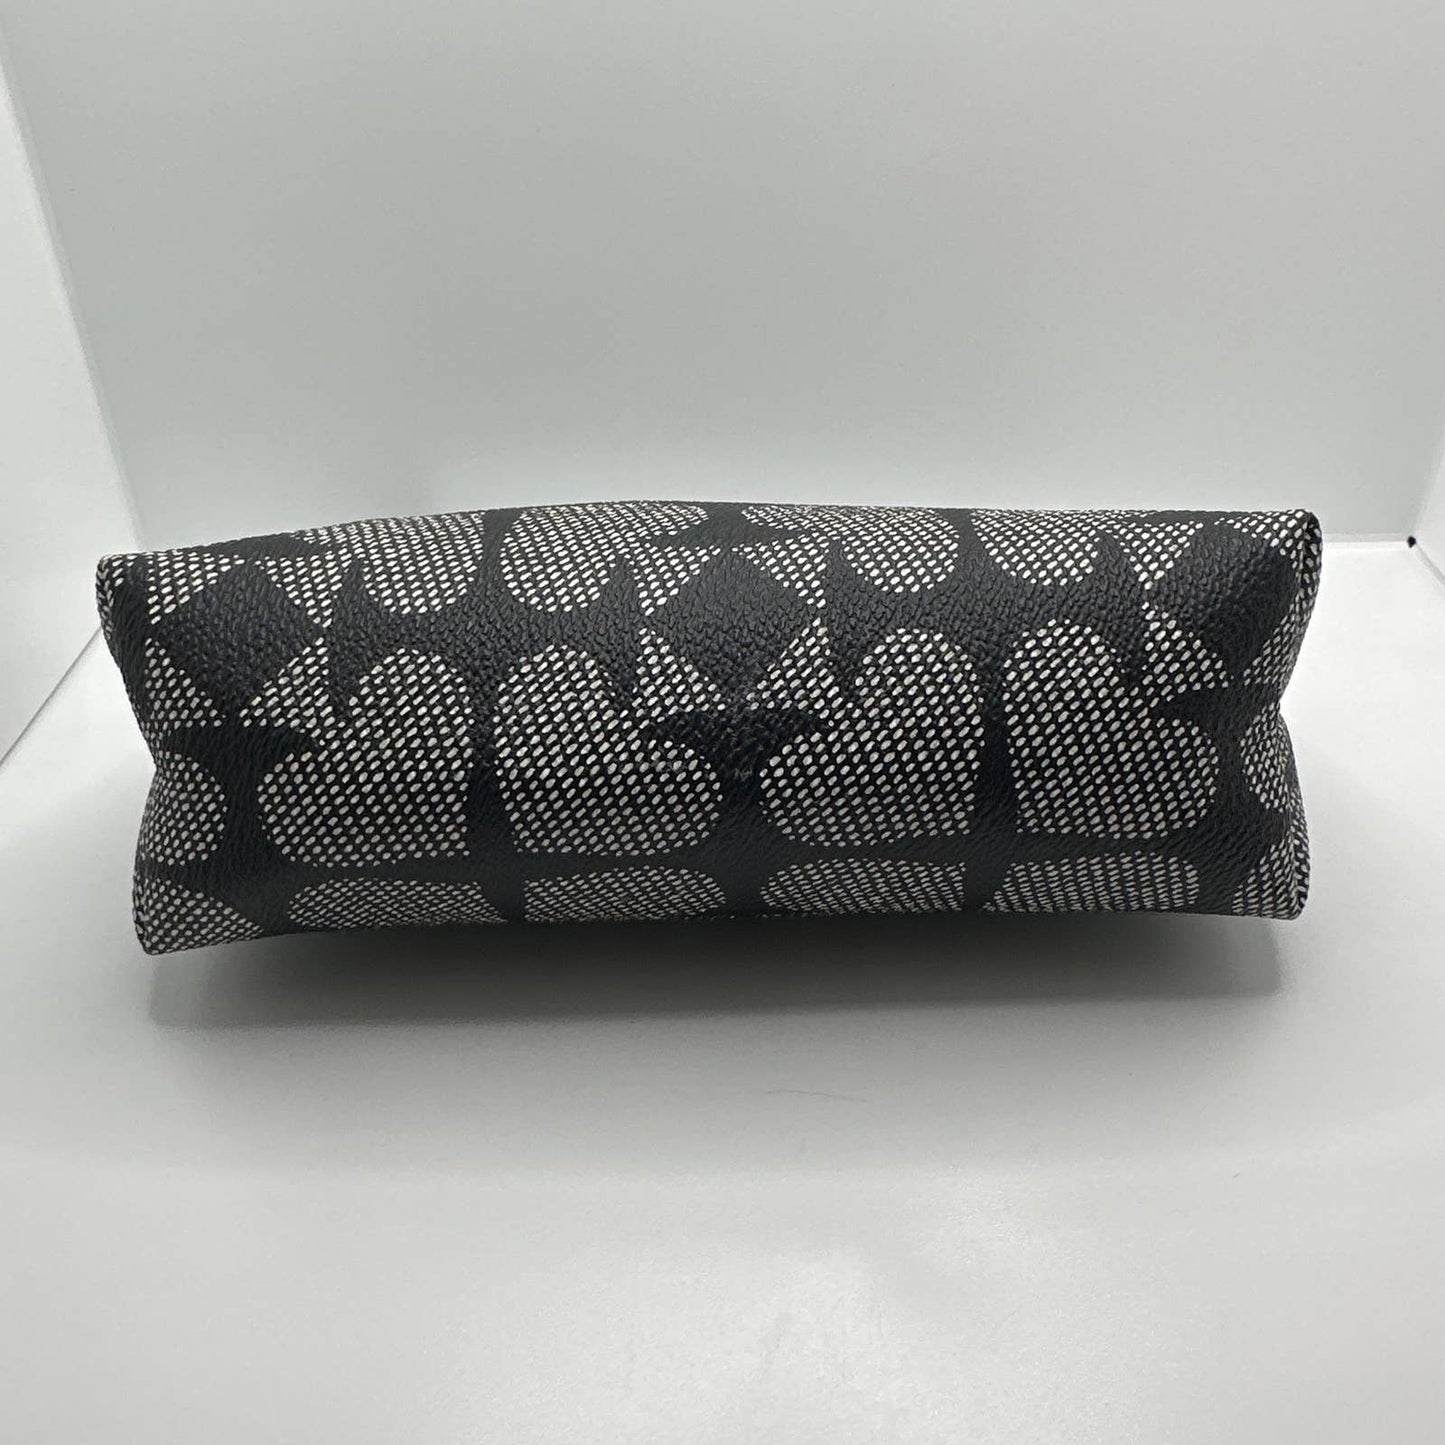 KATE SPADE New York Pebbled Ace of Spades Black and Gray Cosmetic Case